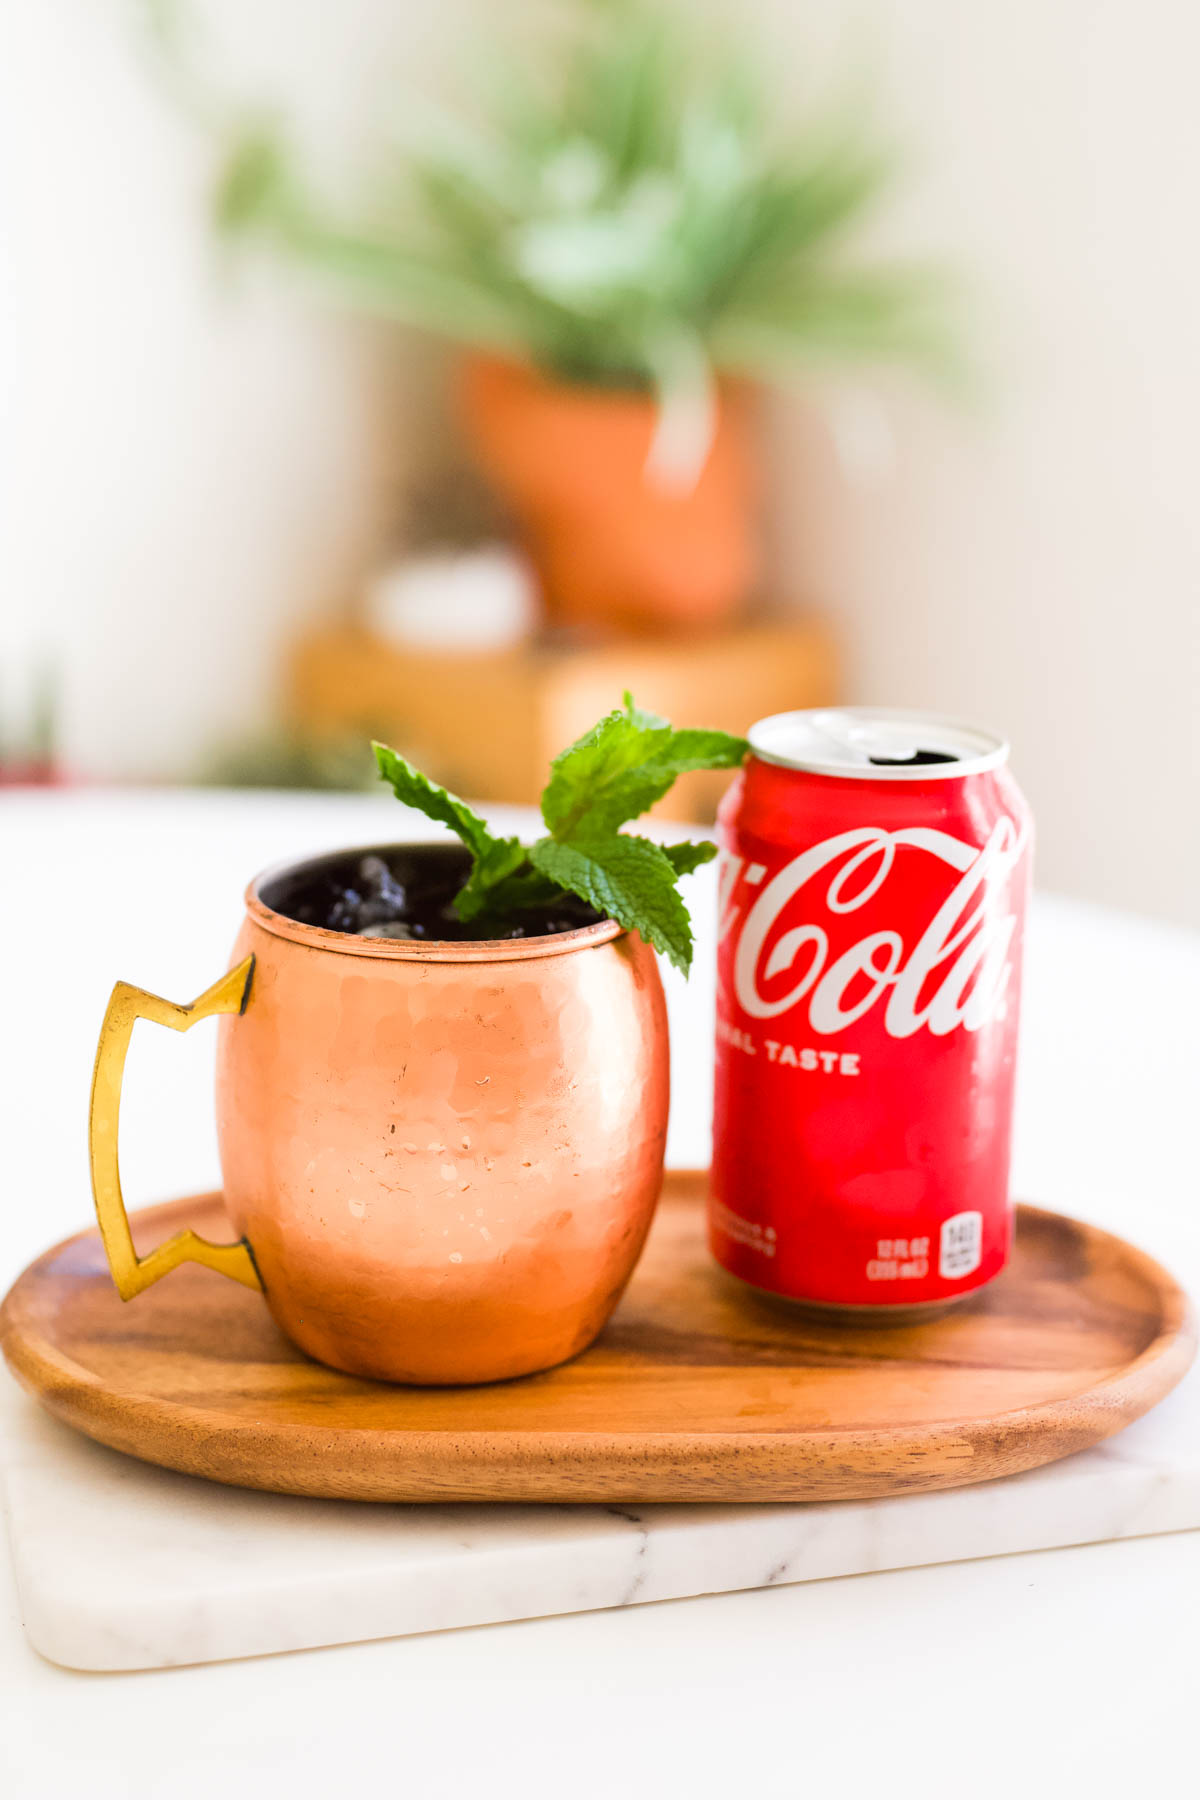 A wooden tray with a copper mug and a can of Coke.